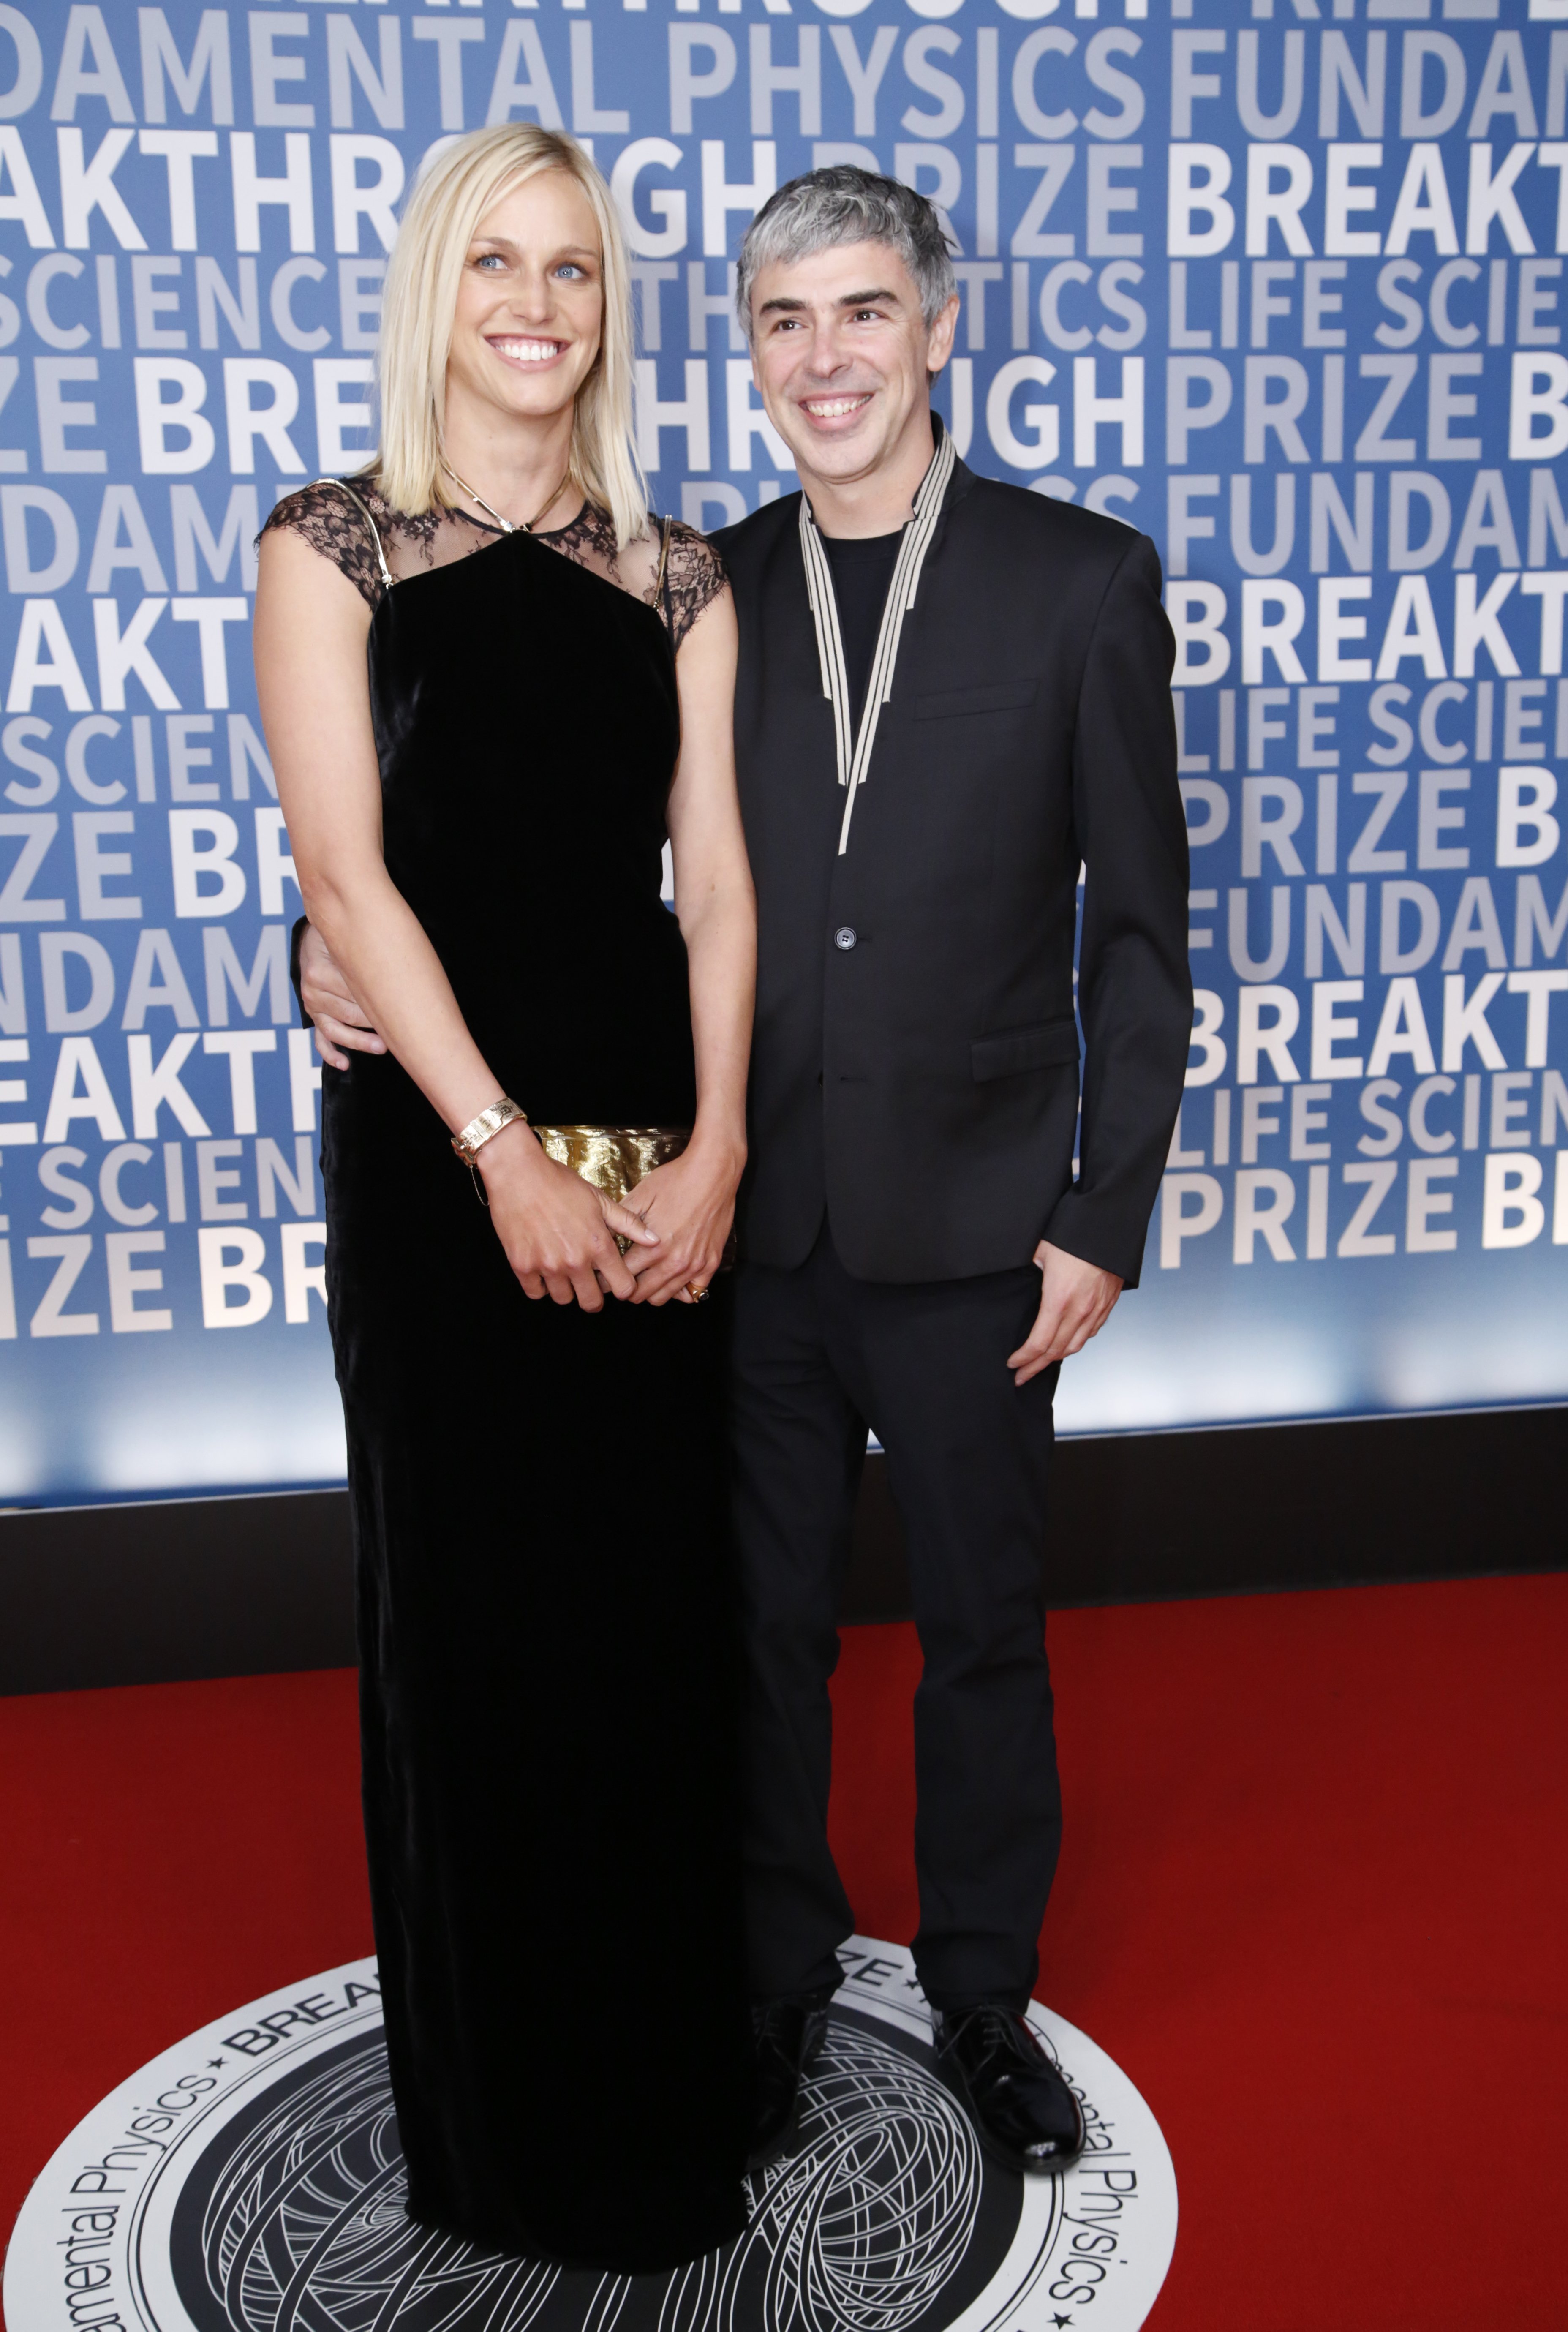 Larry Page and Lucinda Southworth at the 2017 Breakthrough Prize on December 4, 2016, in California | Source: Getty Images 